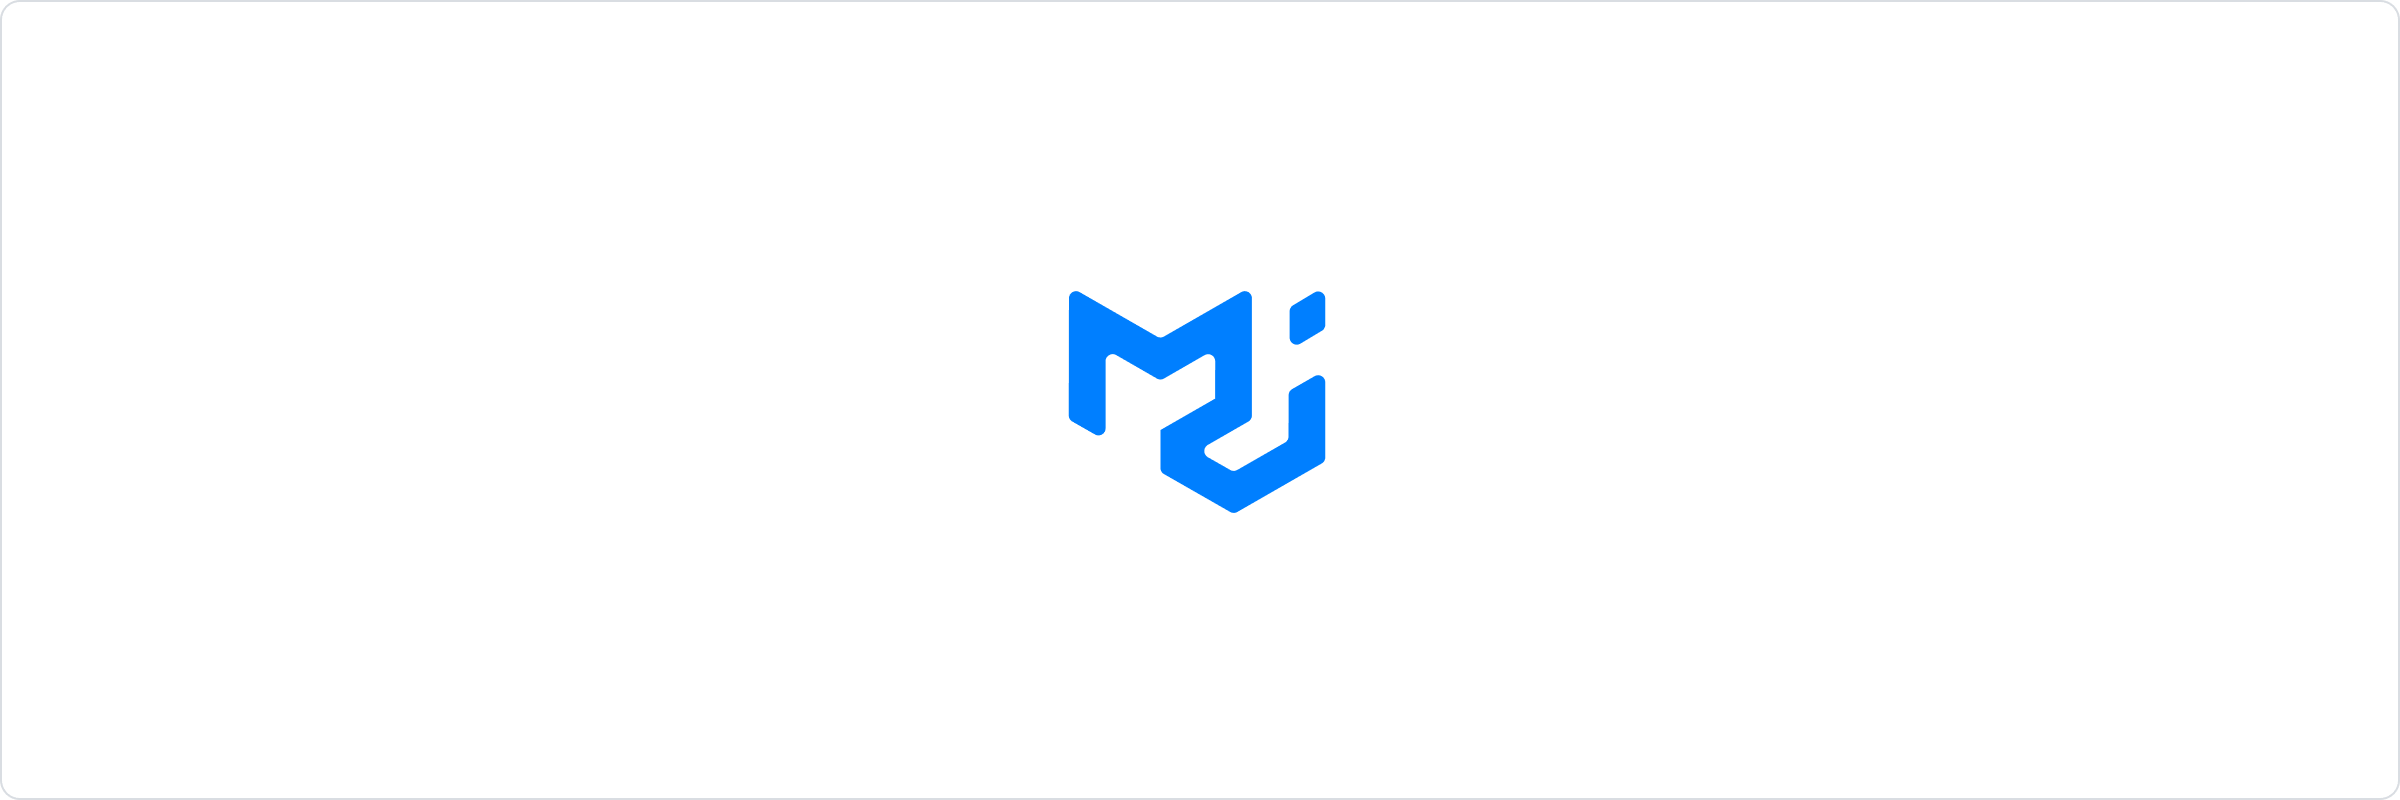 The new Material UI logo